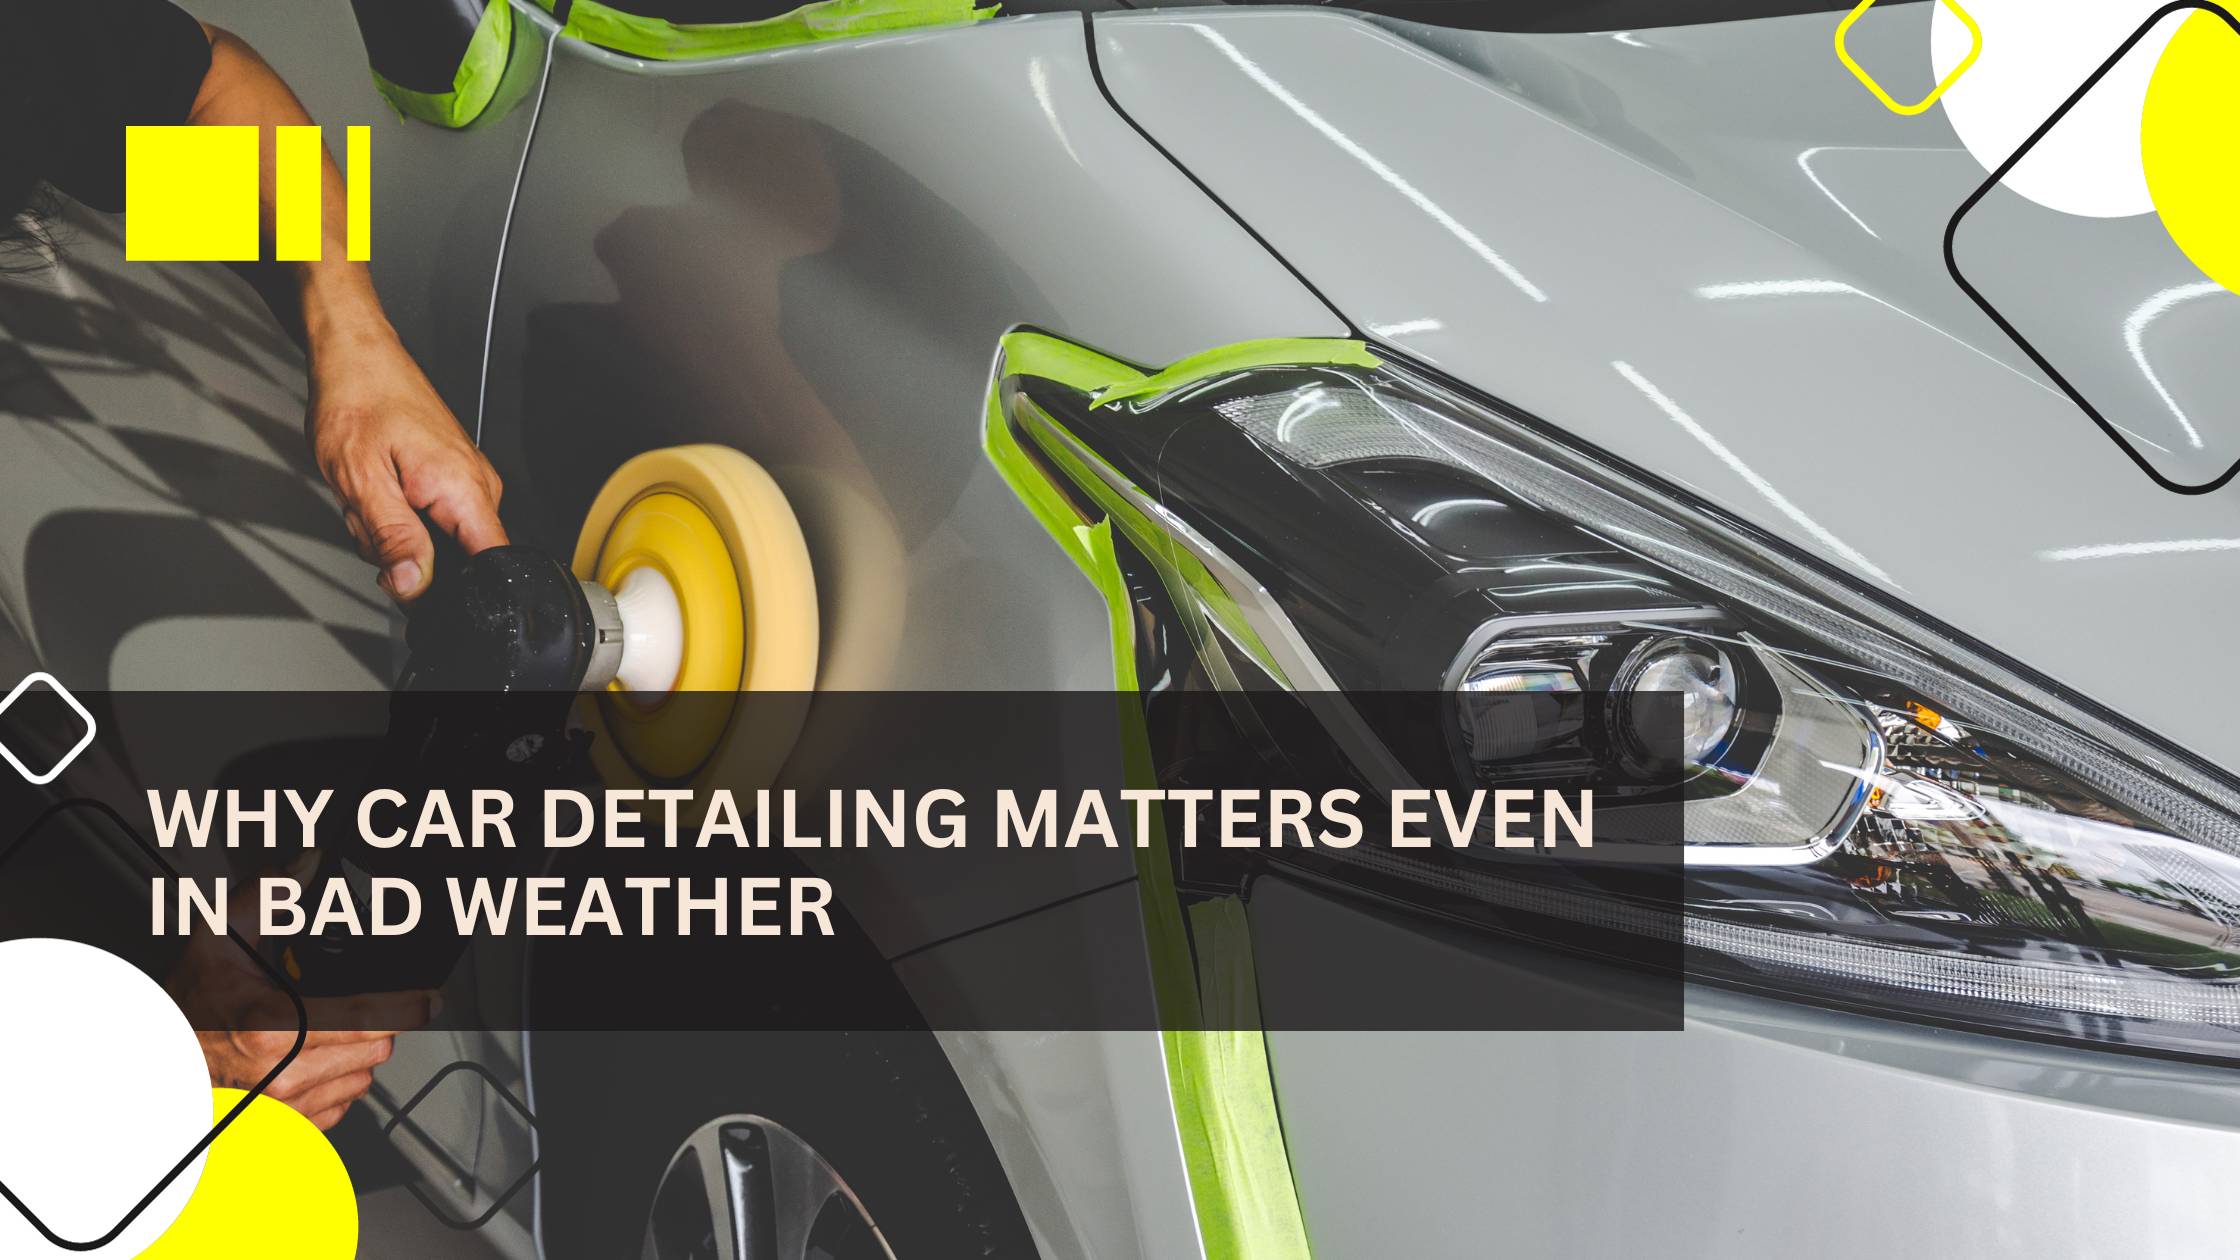 Why Car Detailing Matters Even in Bad Weather